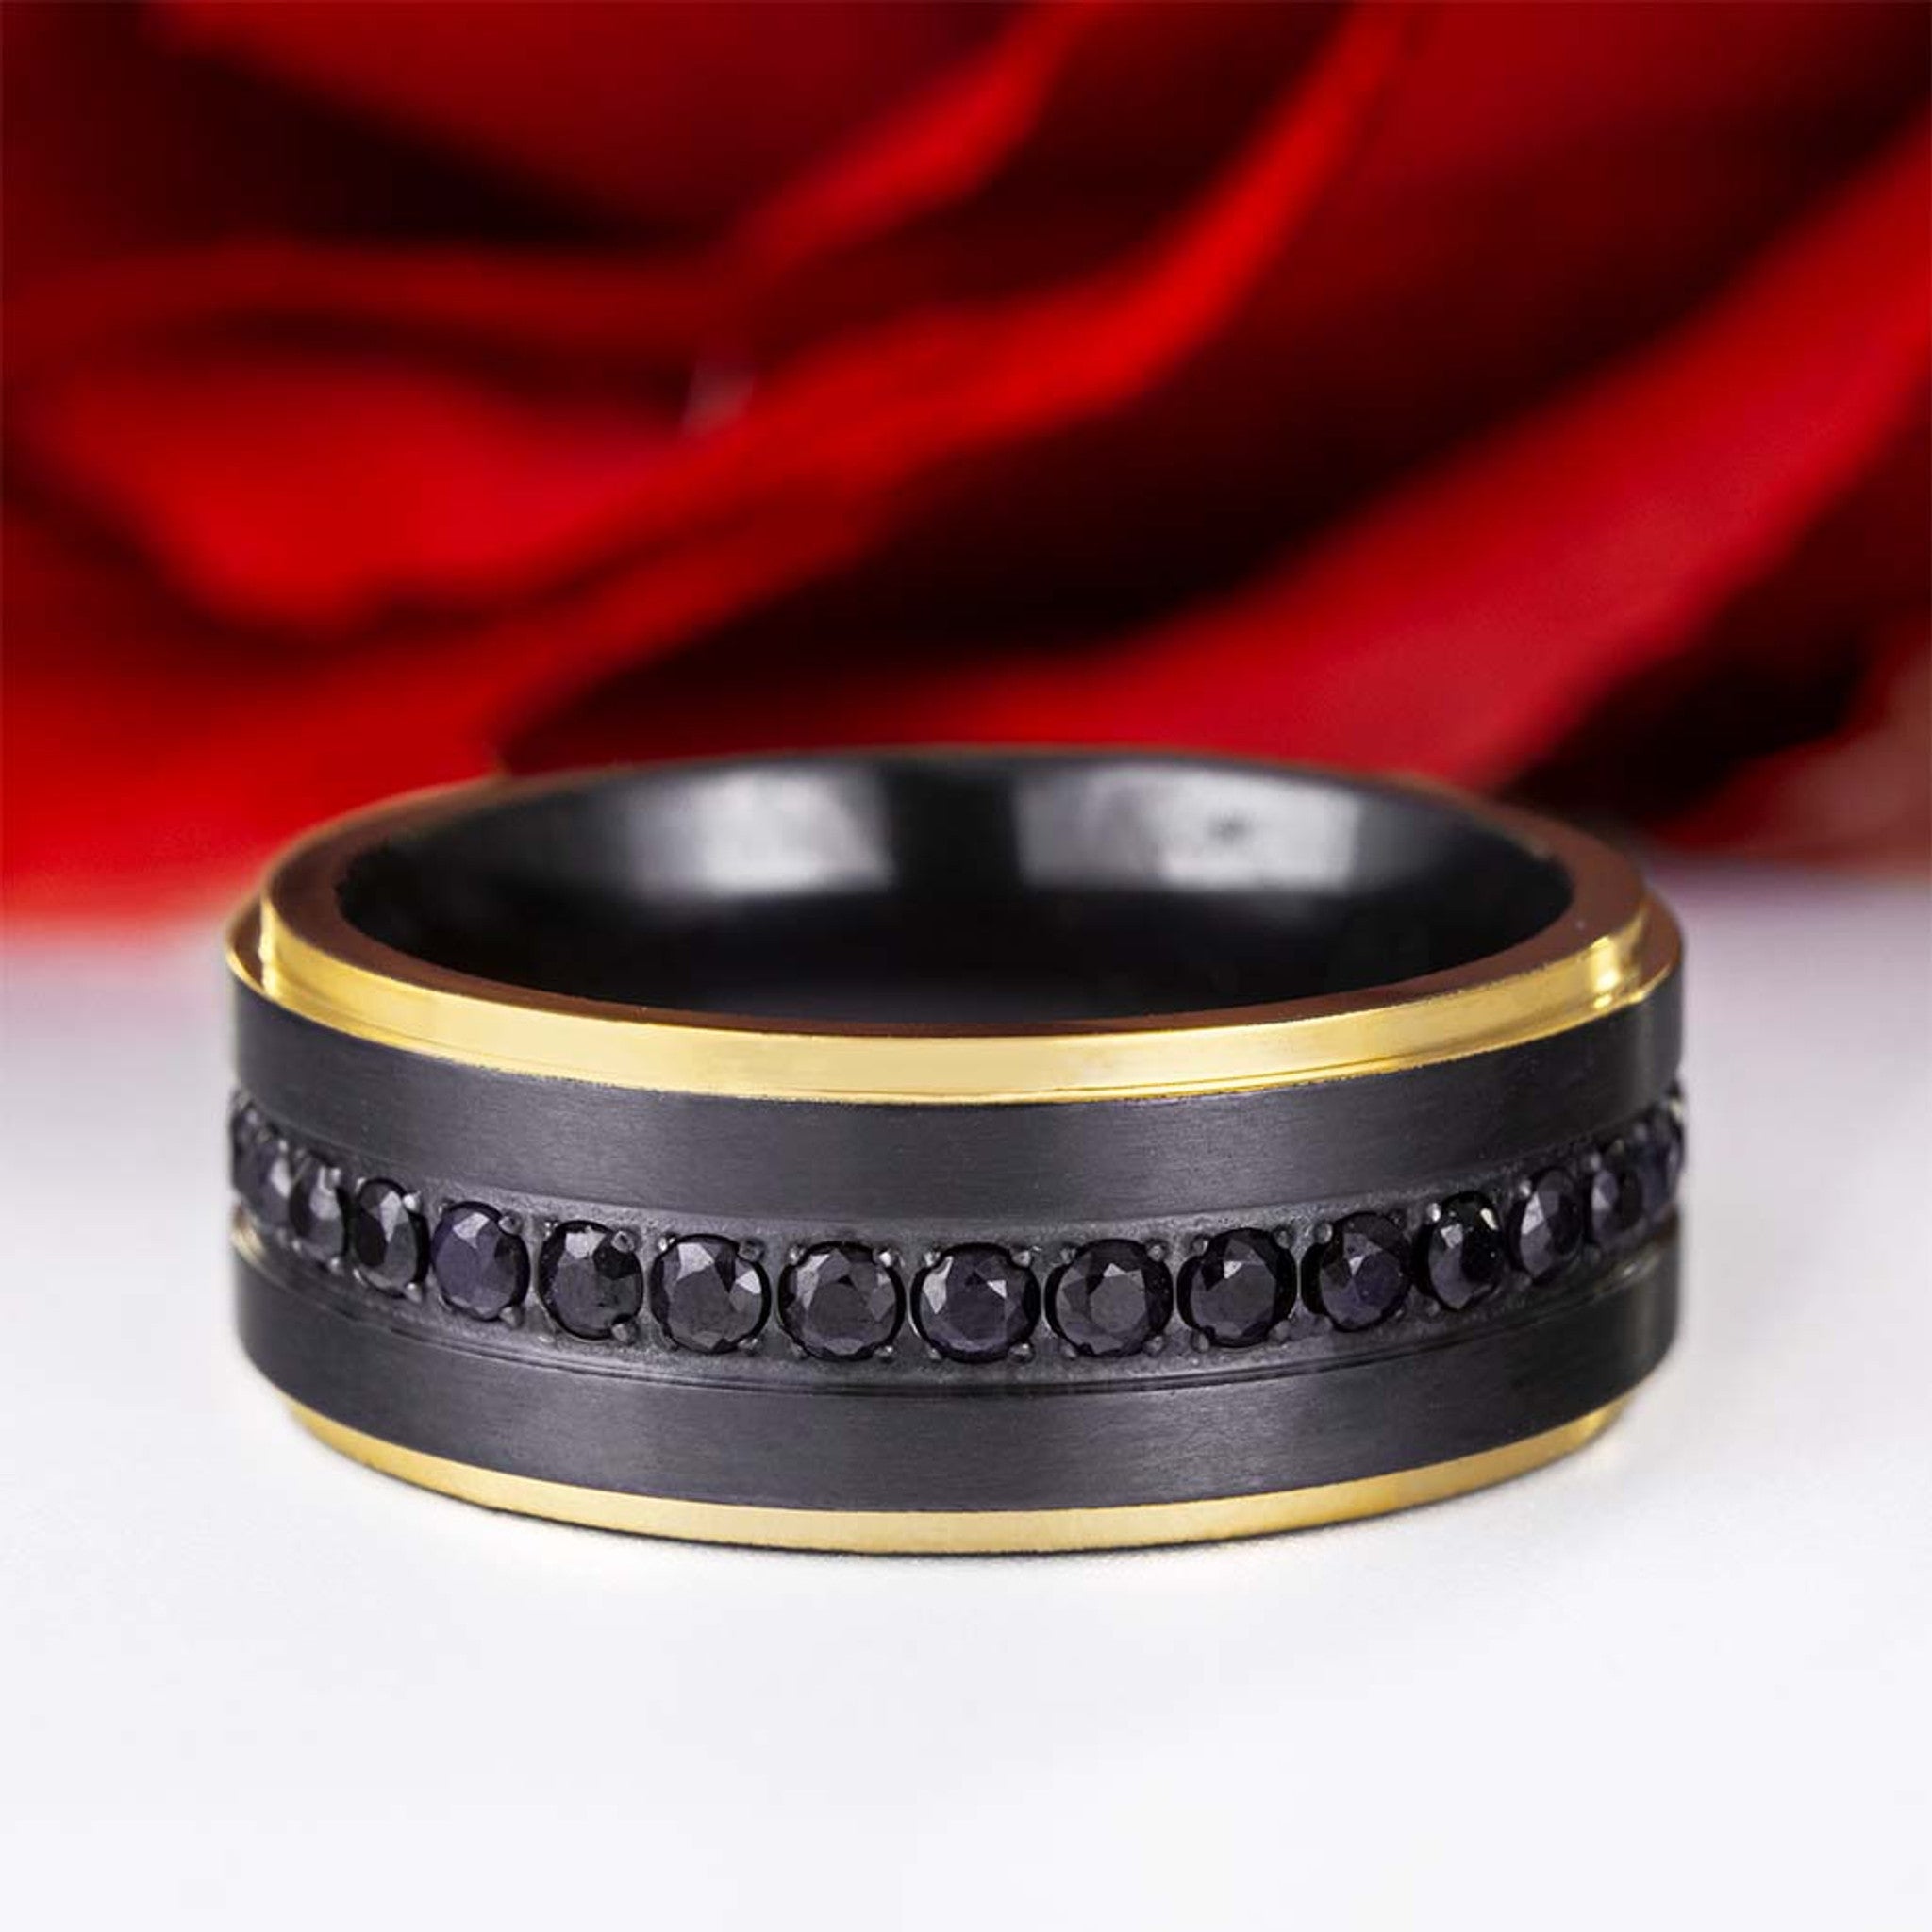 3 Pcs high quality Titanium Stainless steel rings black for Men  colors:black, gold, silver Color US Color Sizes 5-13 | Wish